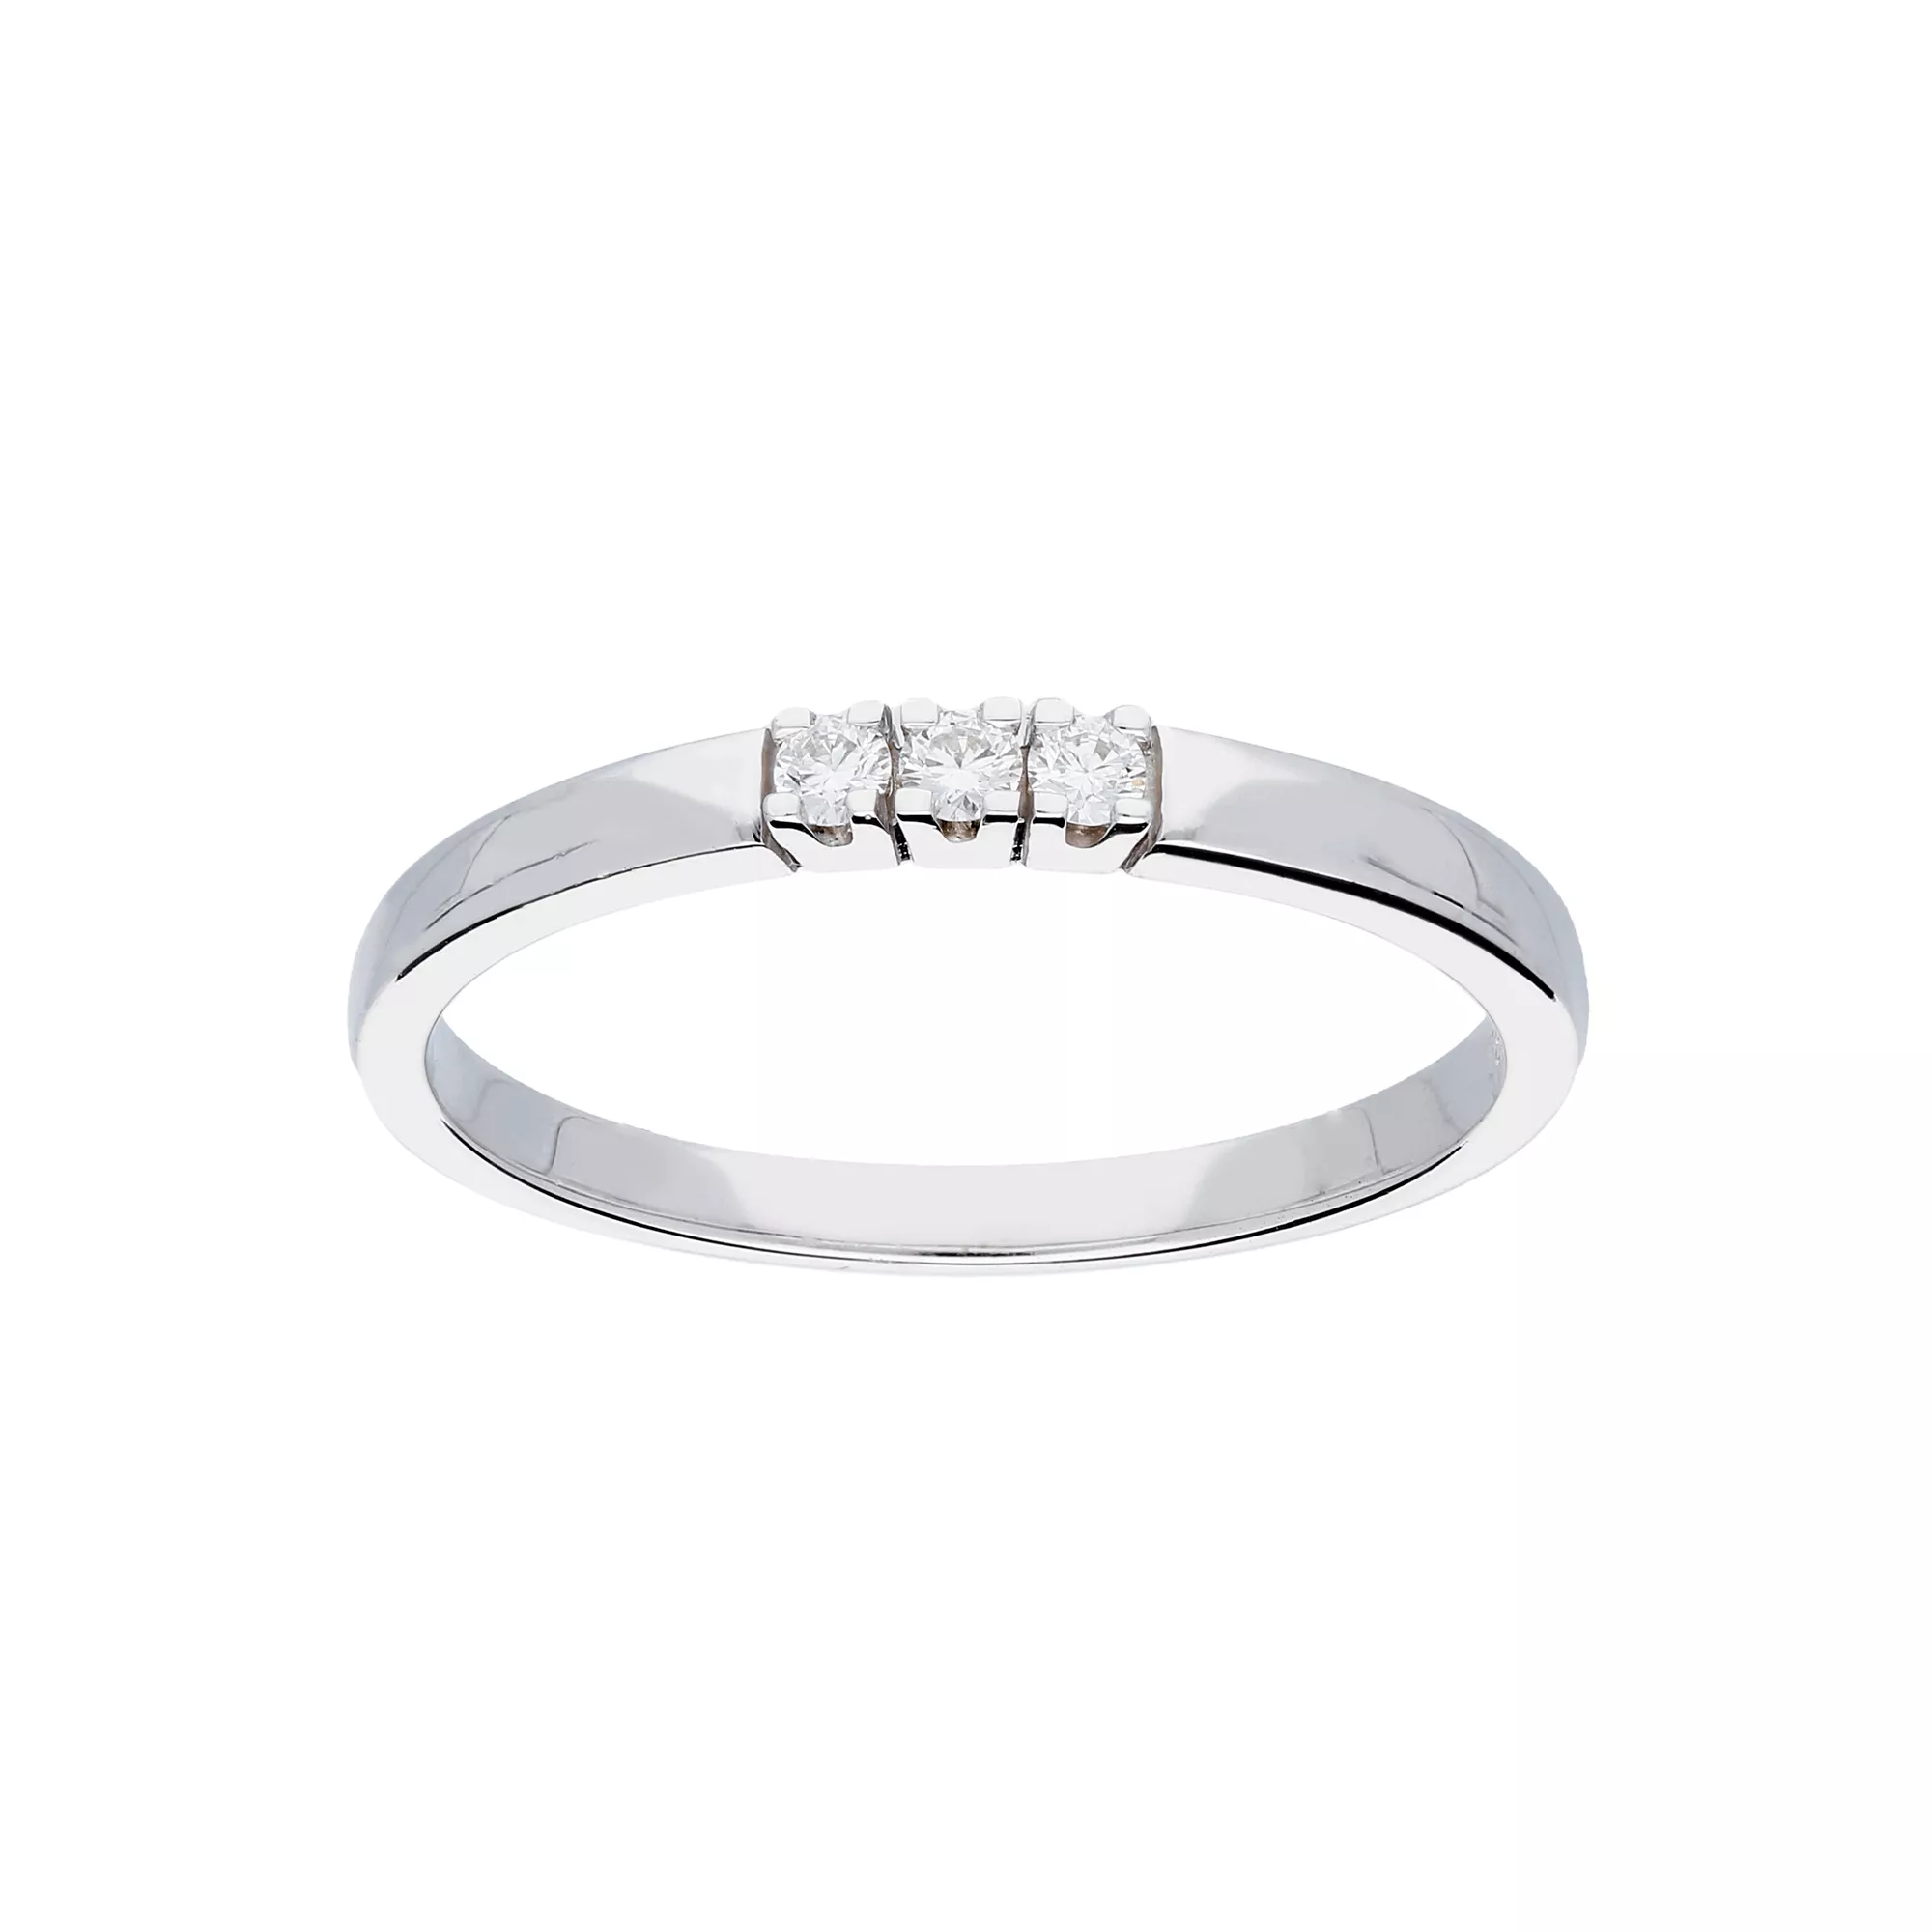 Glow Witgouden Ring - Glanzend Diamant 3- 0.06ct G/si 214.3016.56